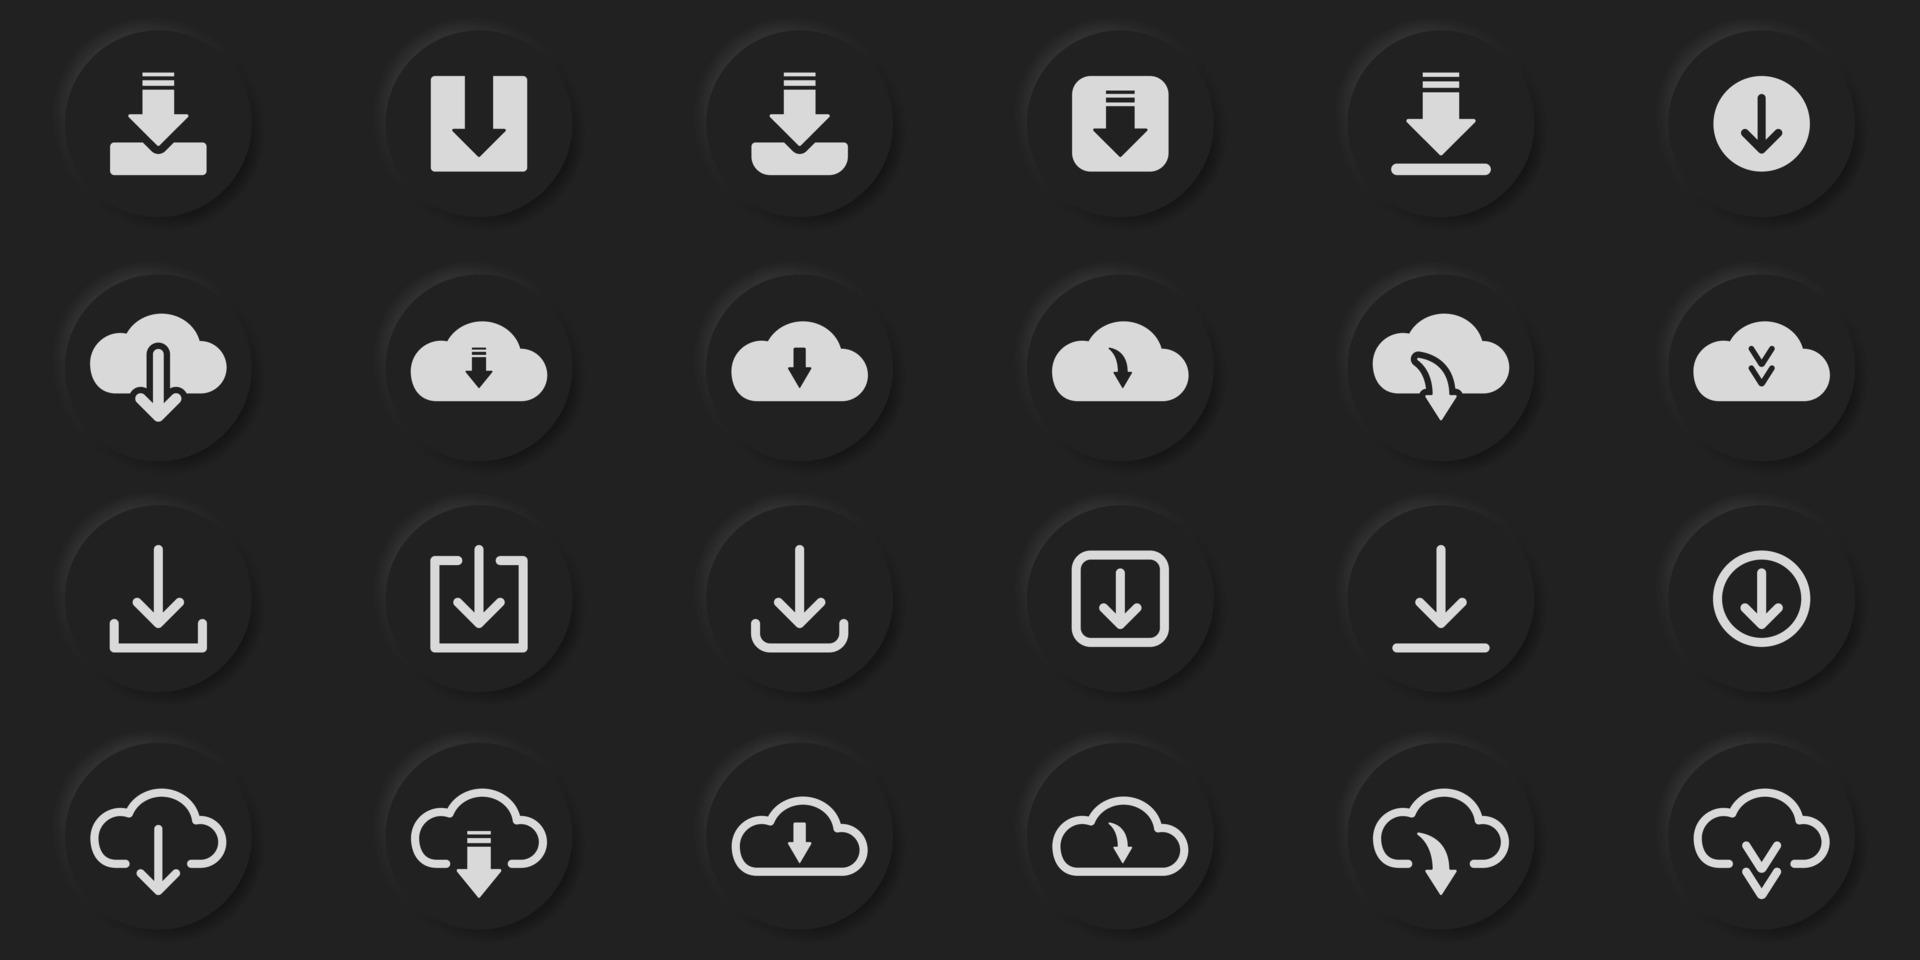 Download Button Line and Silhouette Icon Set. Cloud, Circle, Arrow Down  Upload Symbol. Download Web App, File, Video, Document Pictogram in  Neumorphism Style on Black Background. Vector Illustration. 9518127 Vector  Art at